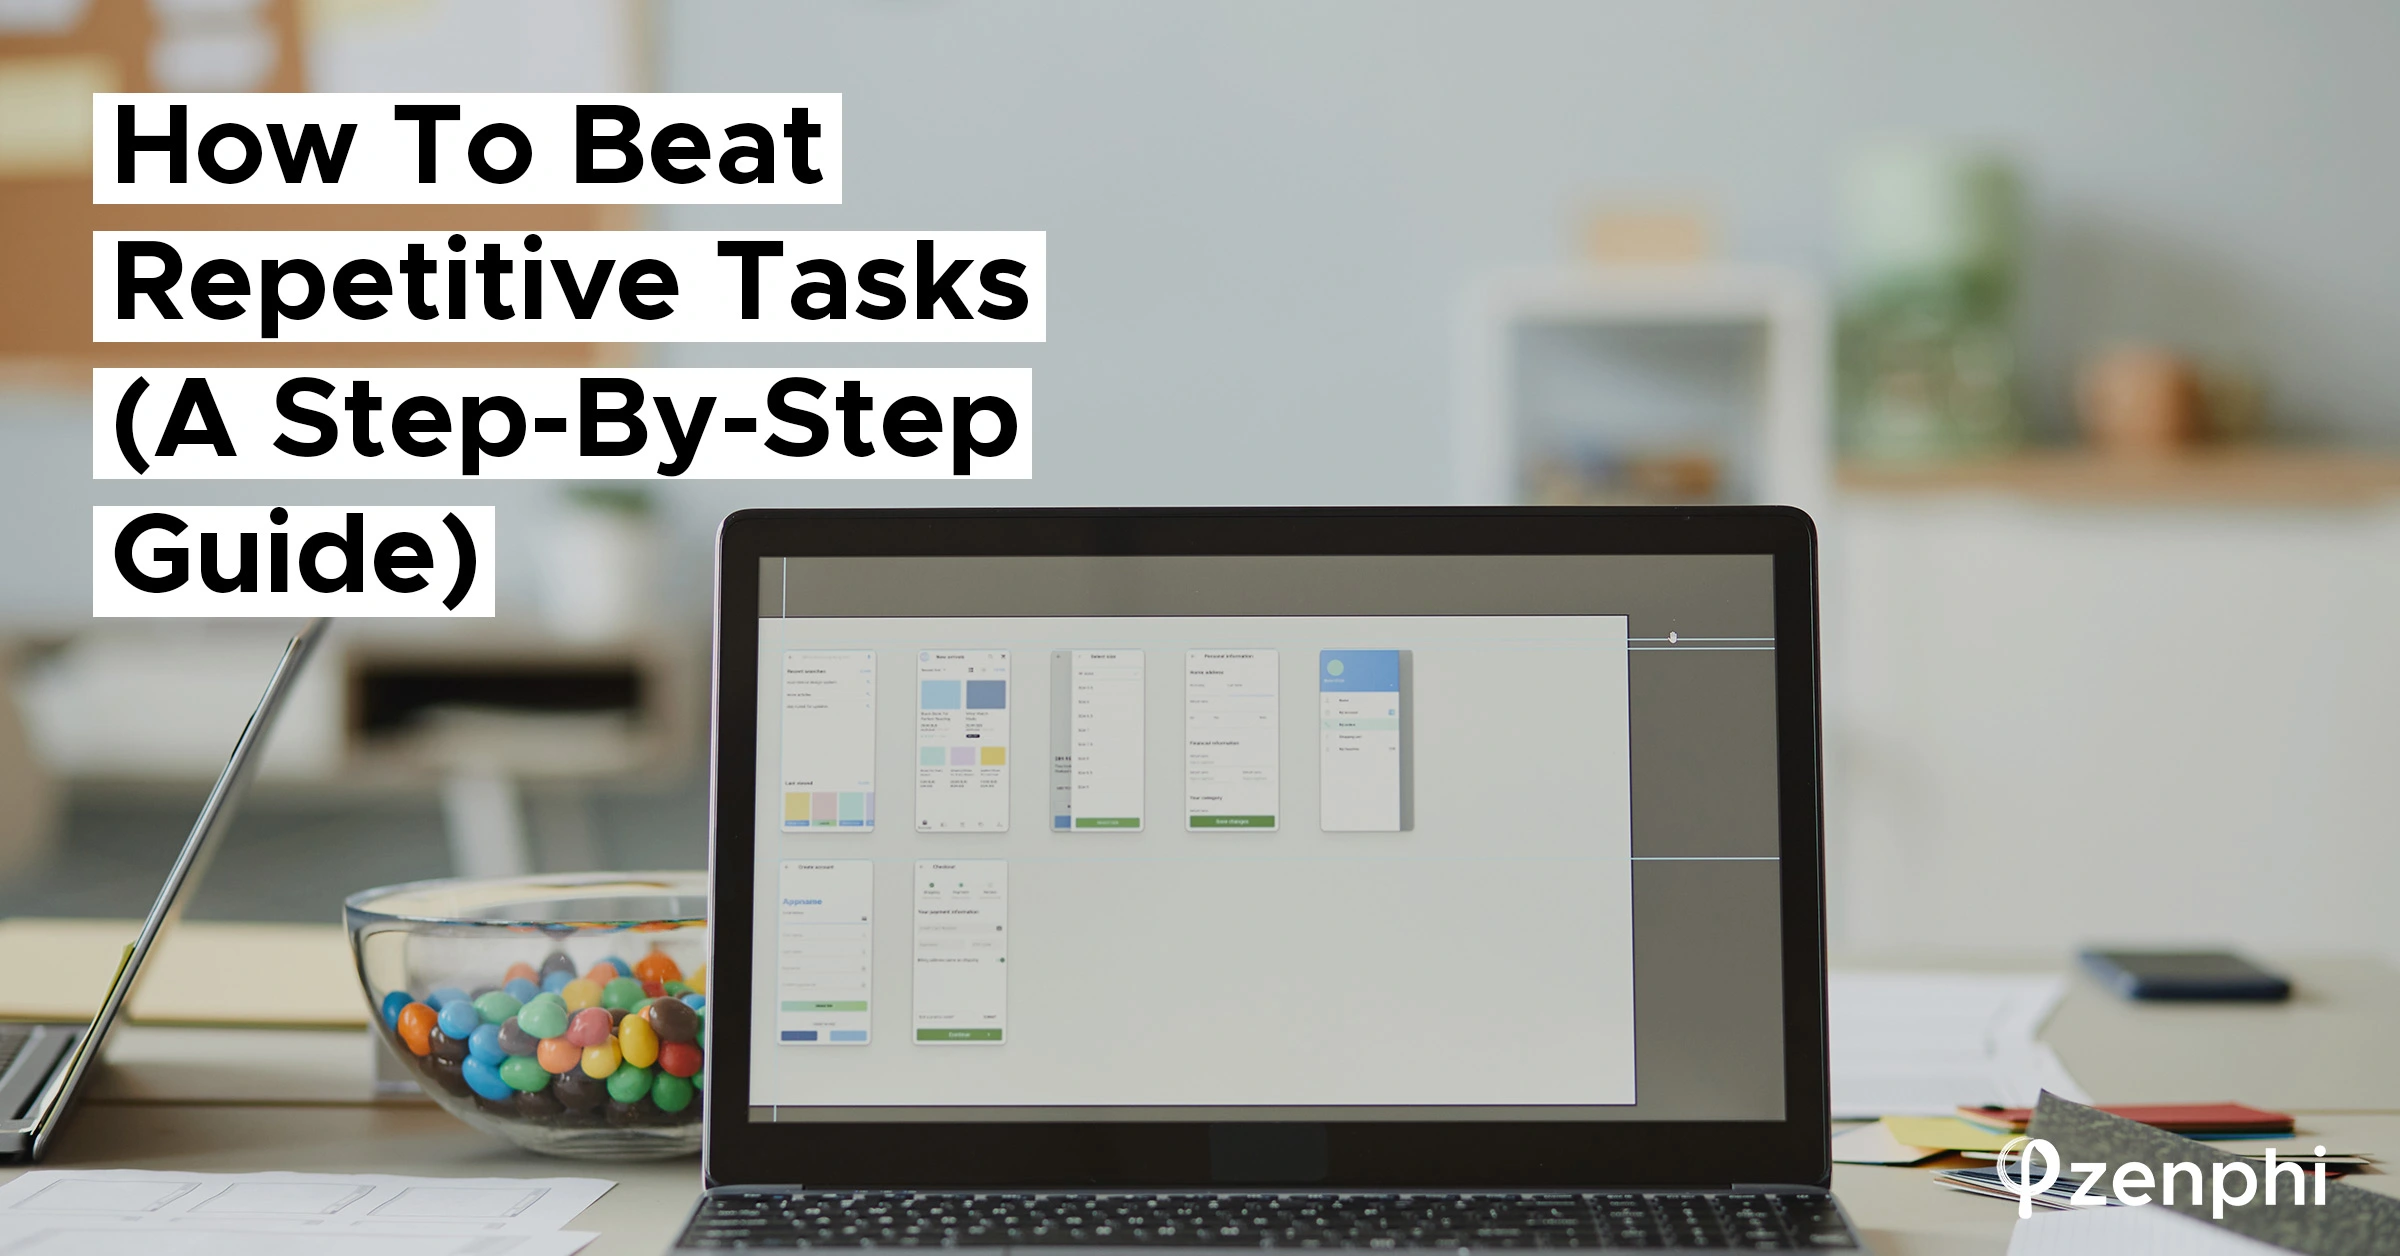 How To Beat Repetitive Tasks